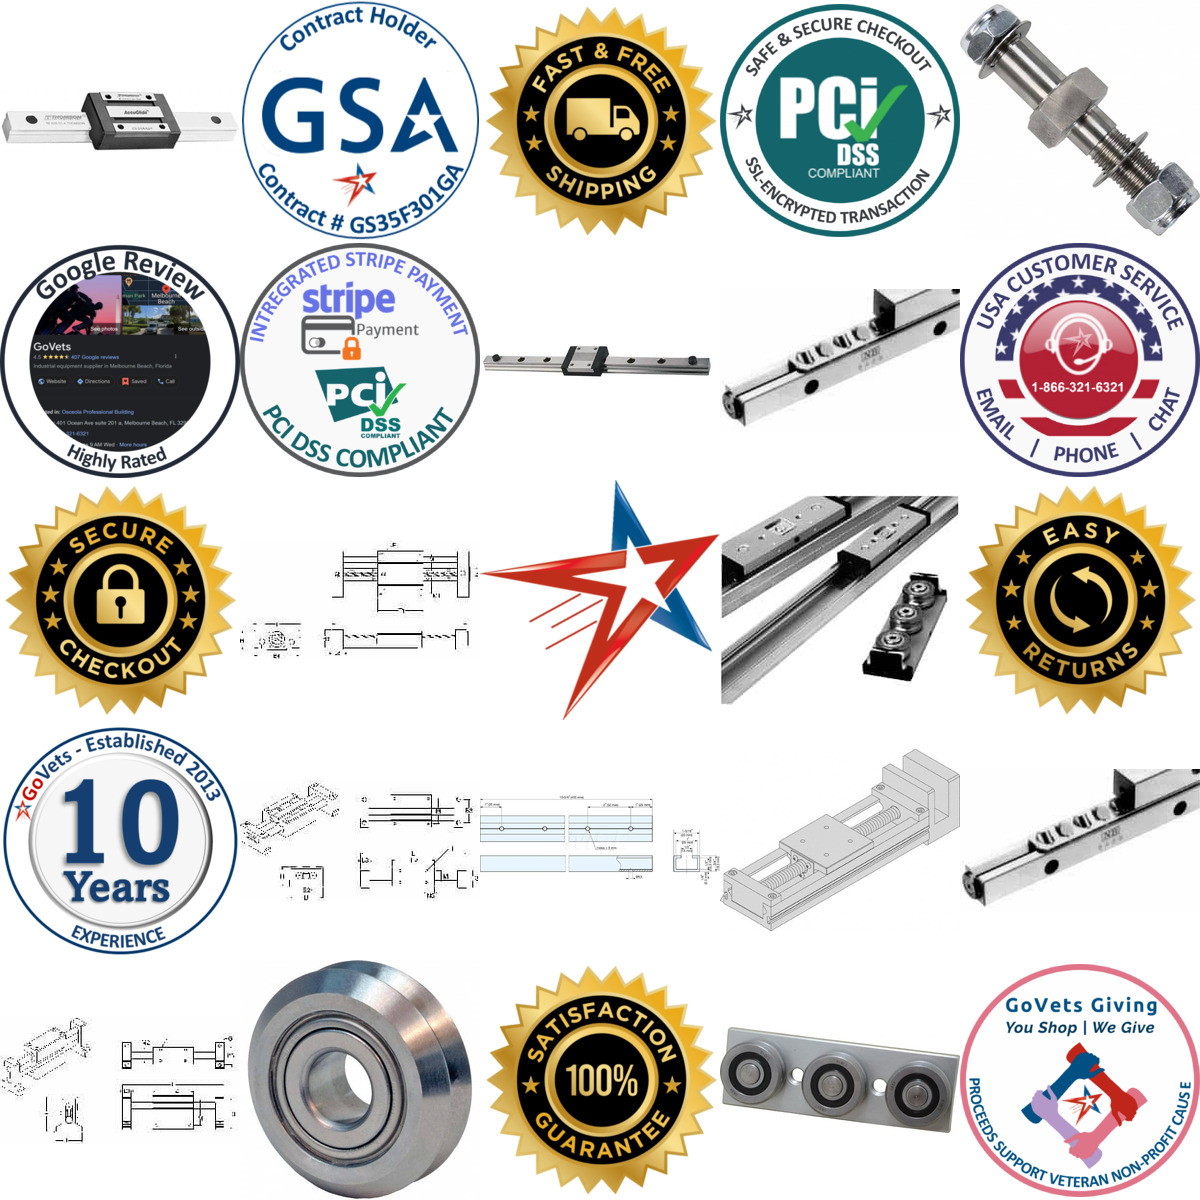 A selection of Linear Motion Systems products on GoVets